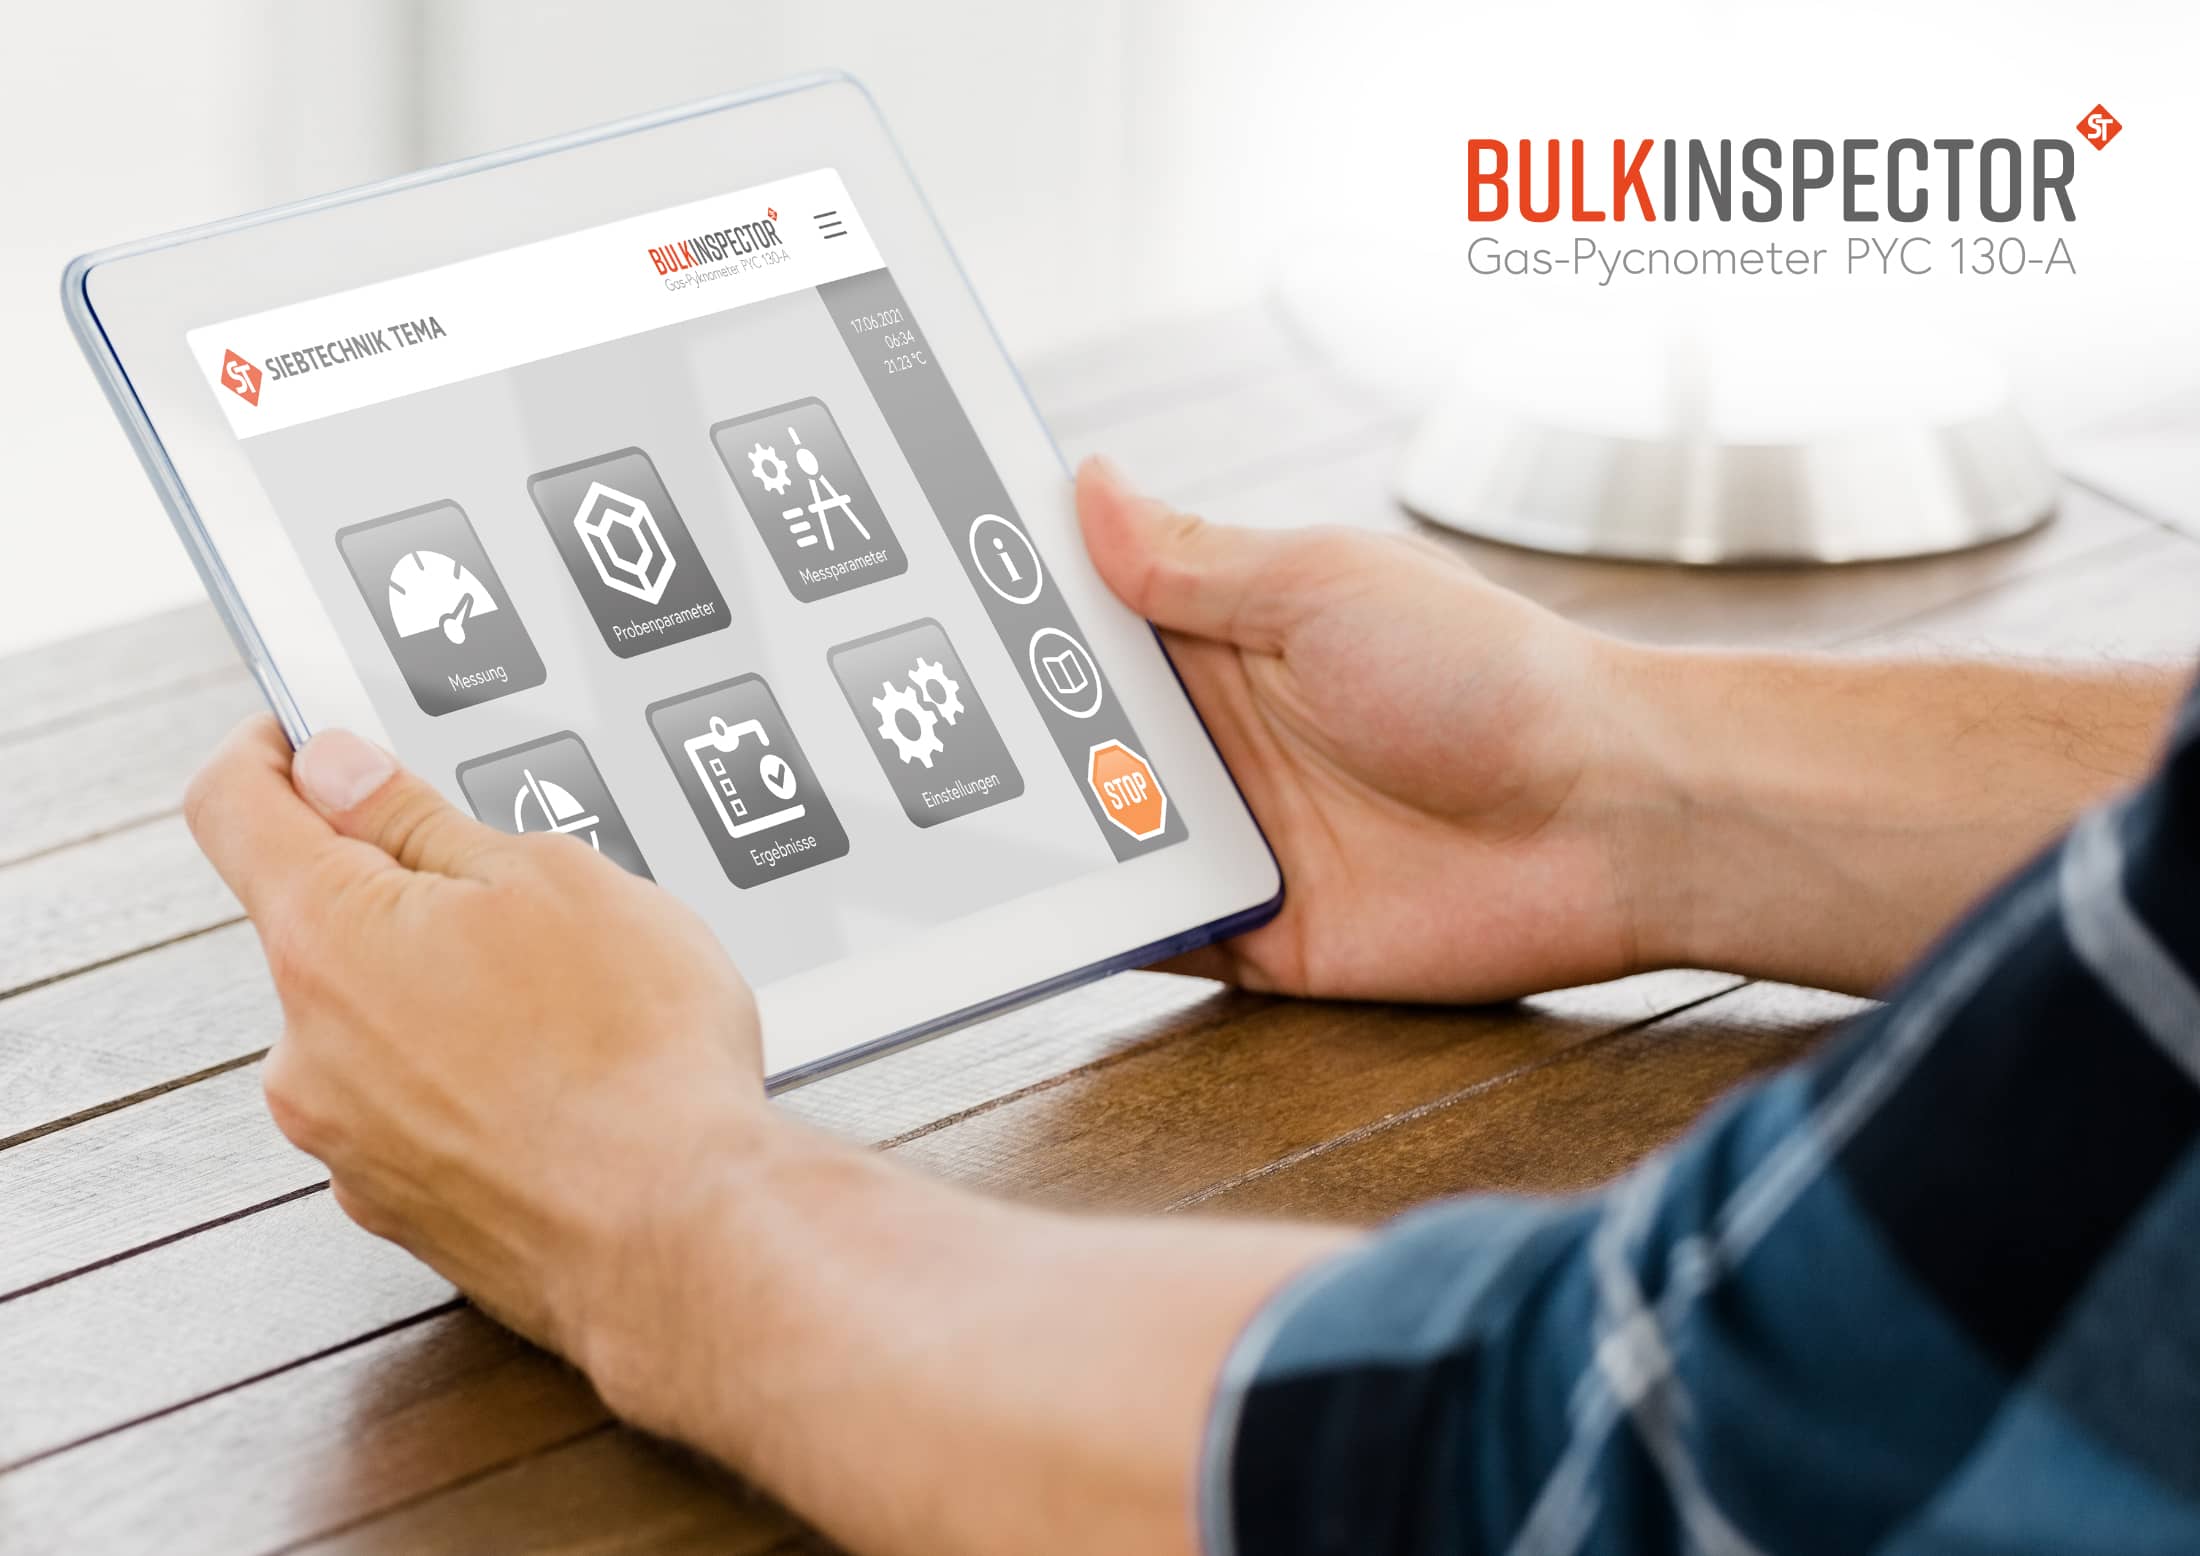 A person operates the BULKINSPECTOR pycnometer via tablet, it shows the start menu. Here you can choose whether you want to make a measurement, set the sample parameters or measurement parameters, calibrate the device, display the results or change general settings.